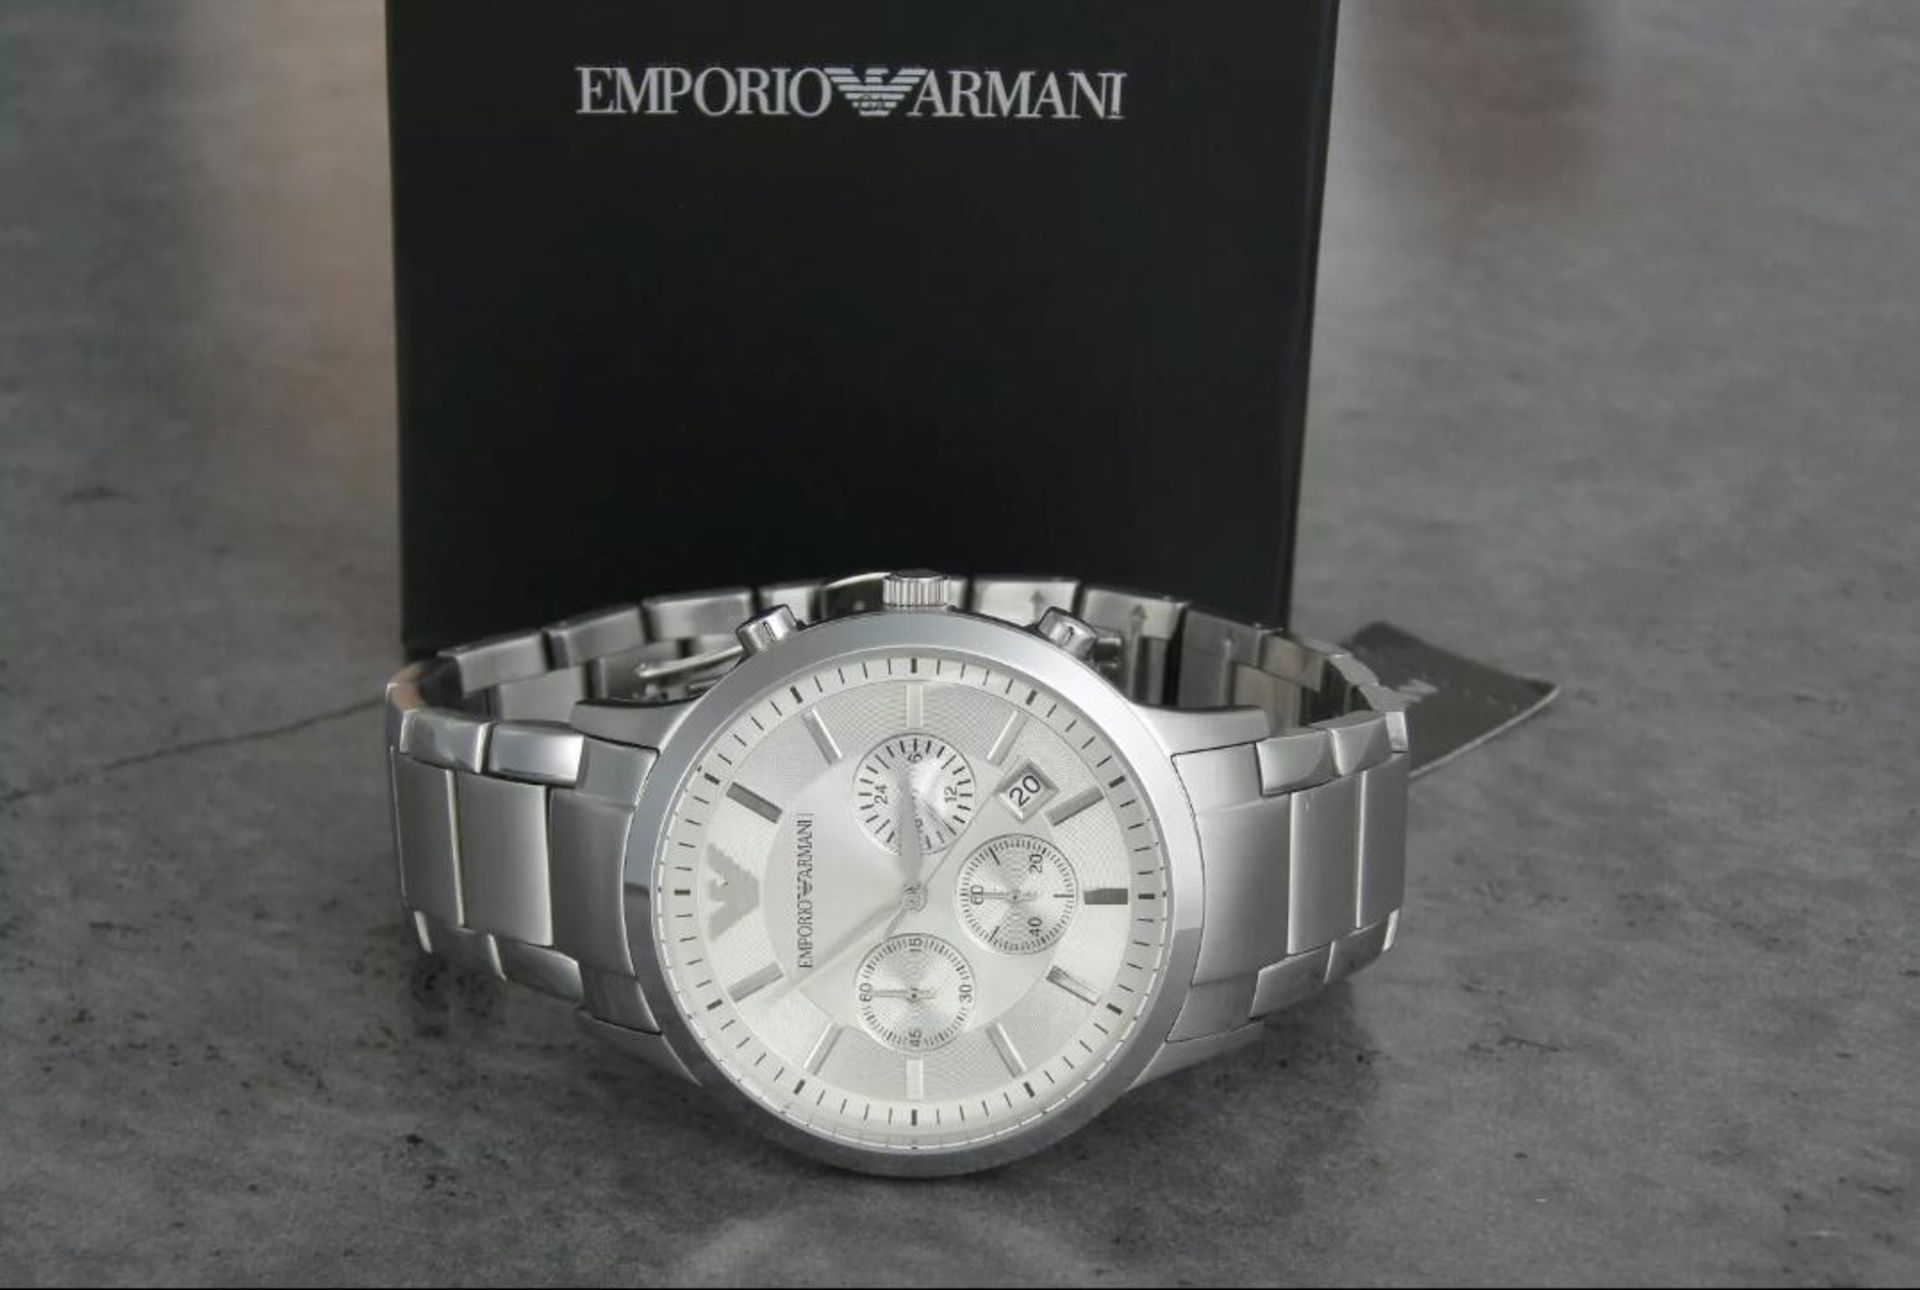 6 X BRAND NEW EMPORIO ARMANI DESIGNER WATCHES, COMPLETE WITH ORIGINAL ARMANI WATCH BOXES, MANUALS - Image 5 of 8